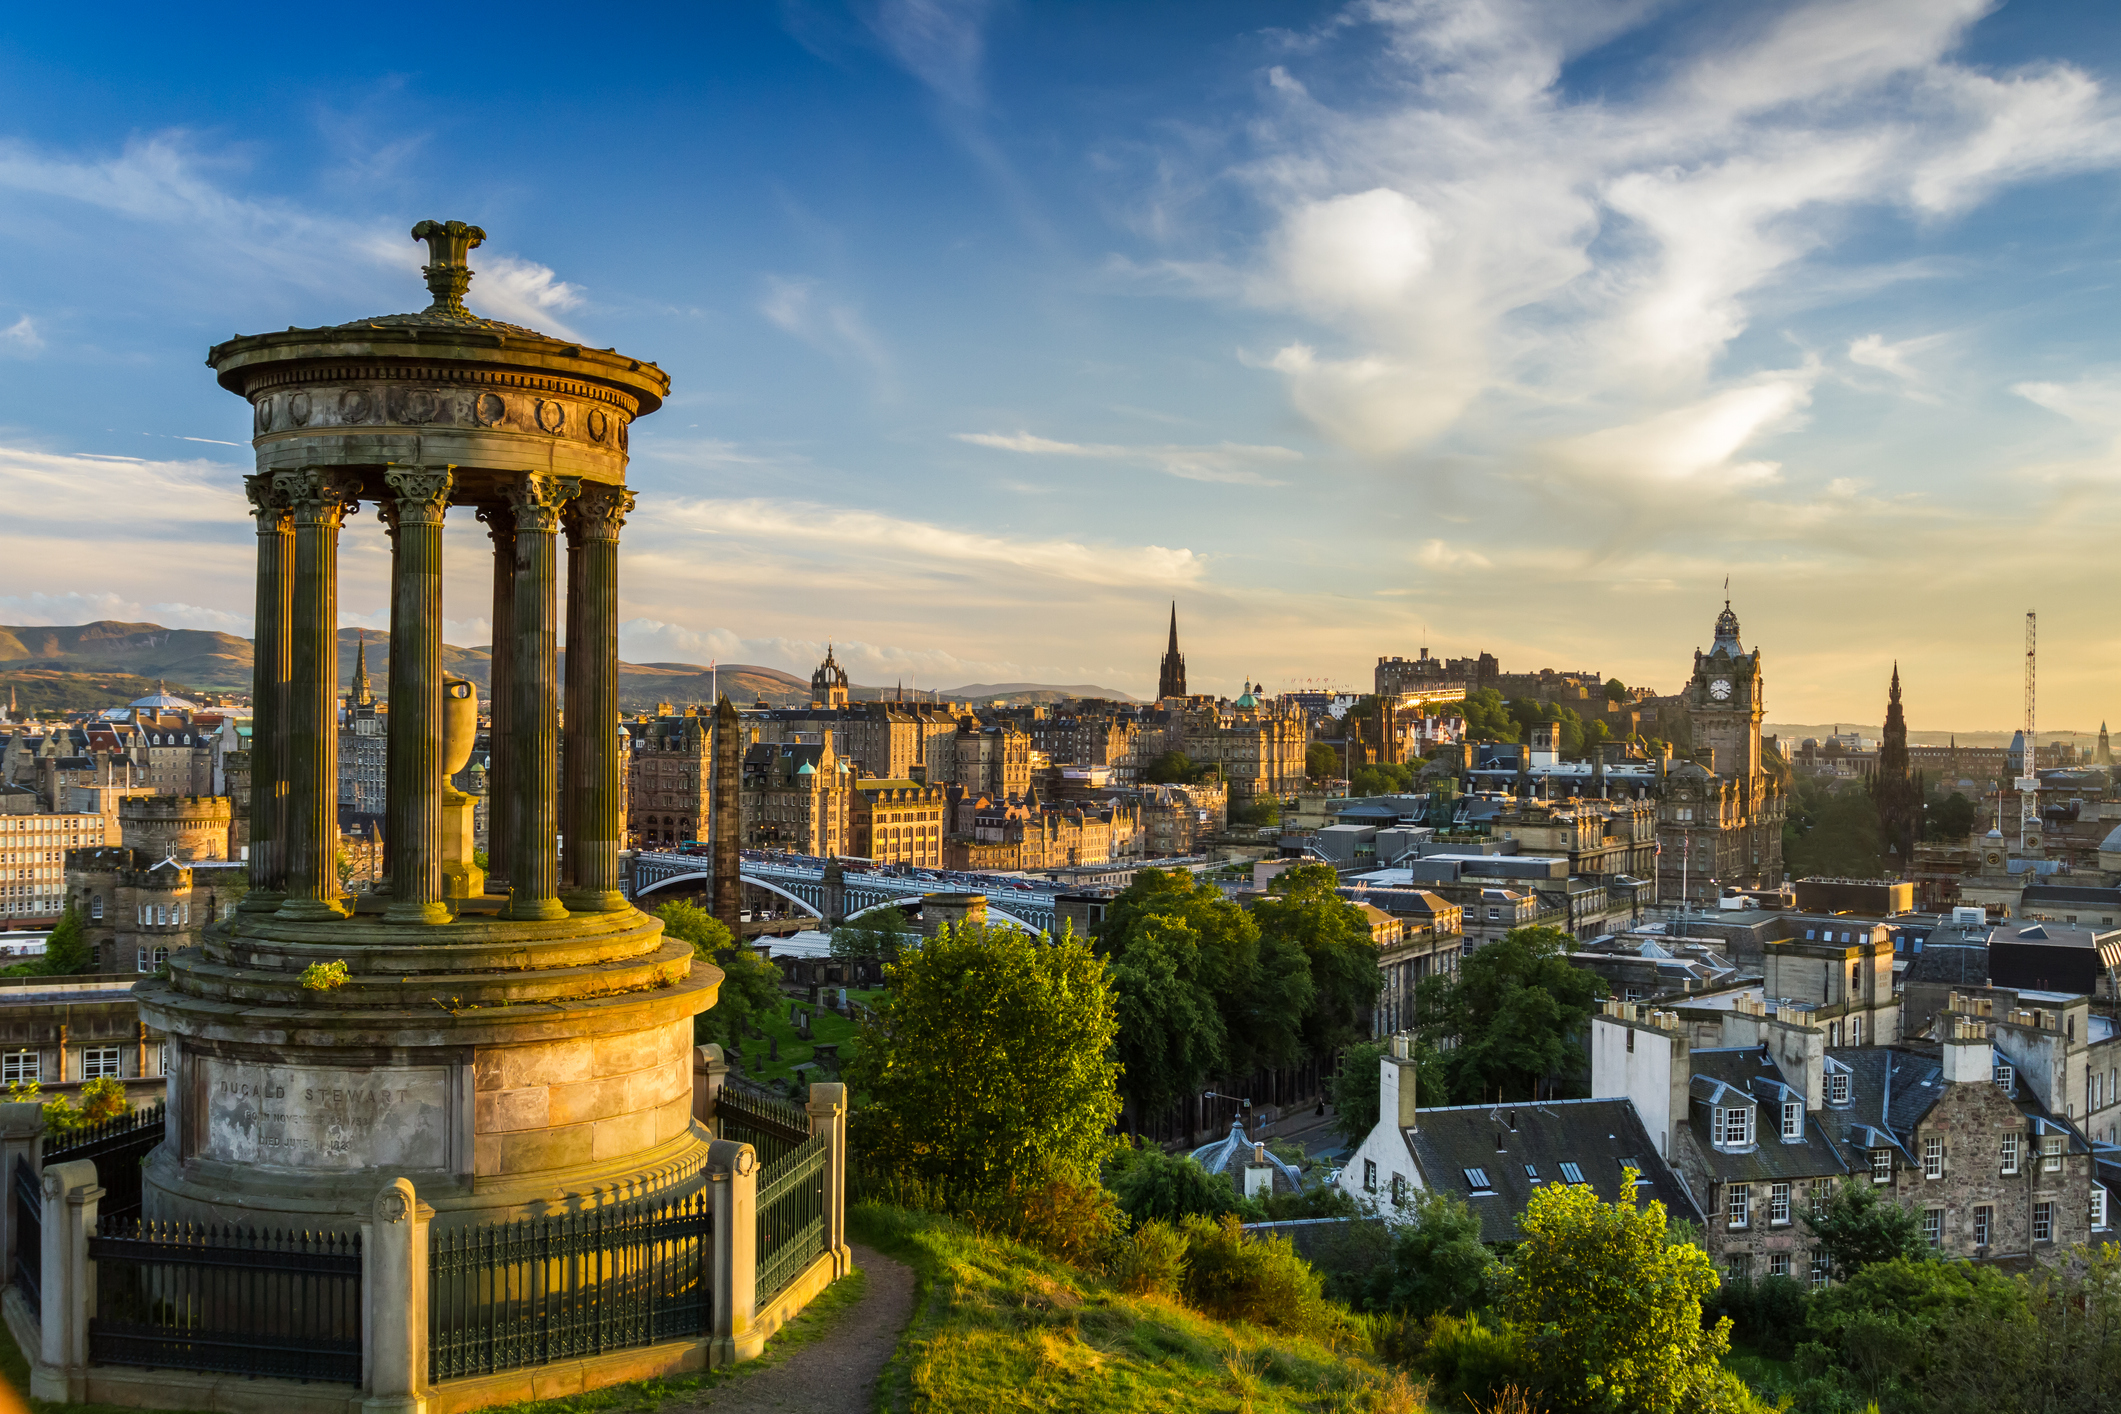 Calton Hill offers one of the best vantage points of Edinburgh